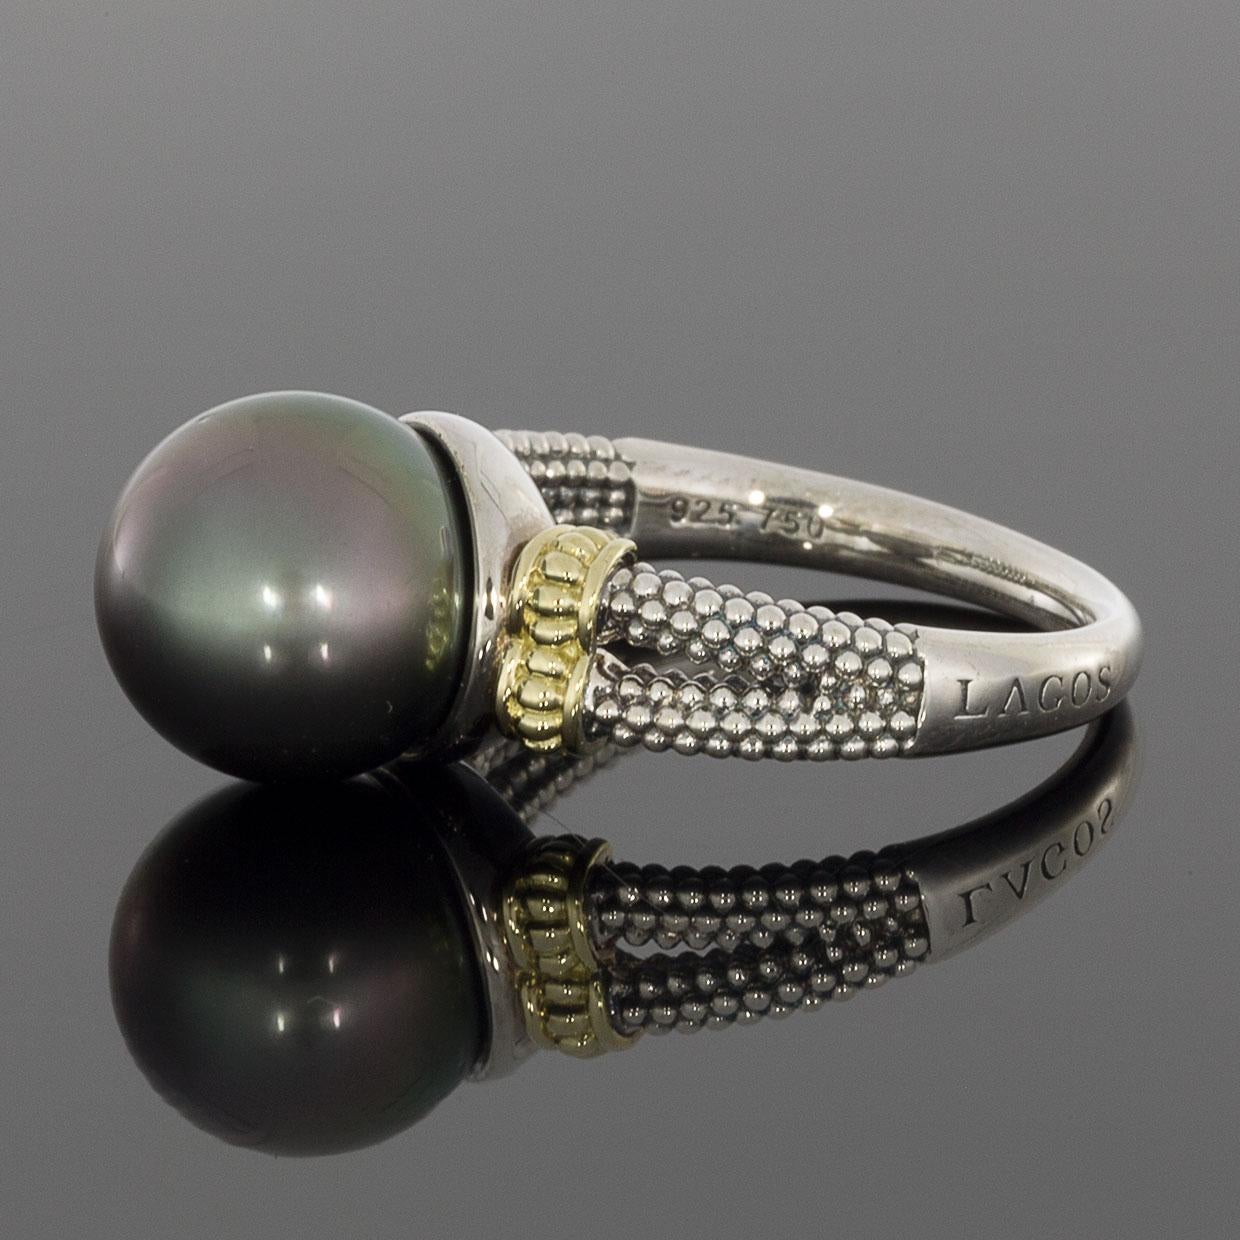 Item Details 
Main Stone Shape Tahitian
Main Stone Treatment Not Enhanced
Main Stone Creation Cultured
Main Stone Pearl
Estimated Retail $595.00
Brand Lagos
Collection Luna
Metal Mixed Metals
Style Solitaire
Ring Size 7.00
Sizable Yes
Pearl Type